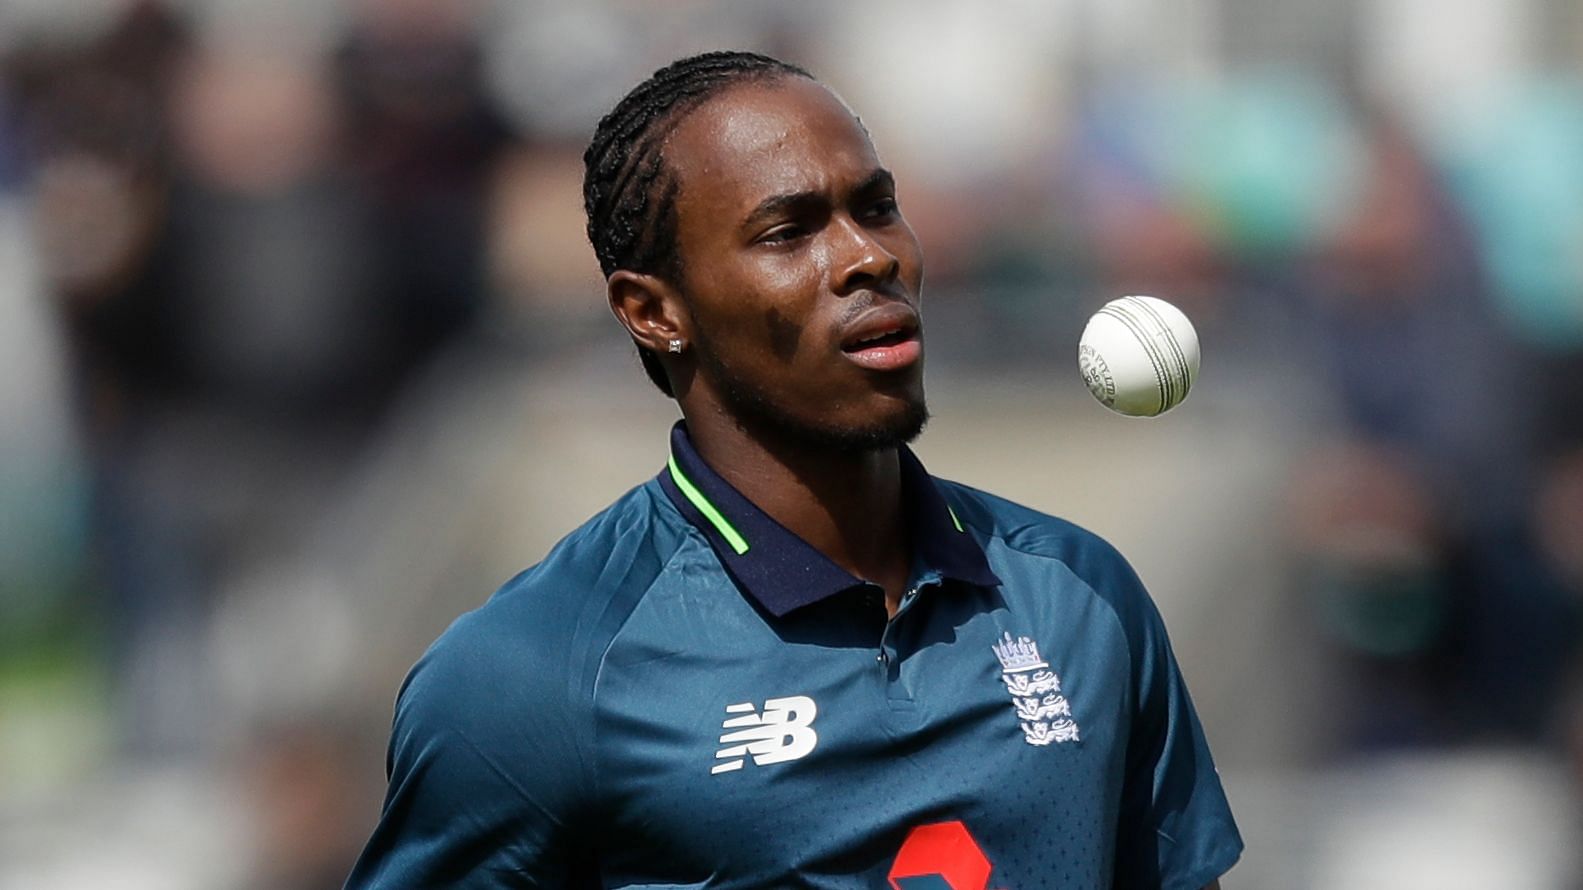 Jofra Archer set his sights on taking the prized wicket of India captain Virat Kohli during the mega event.